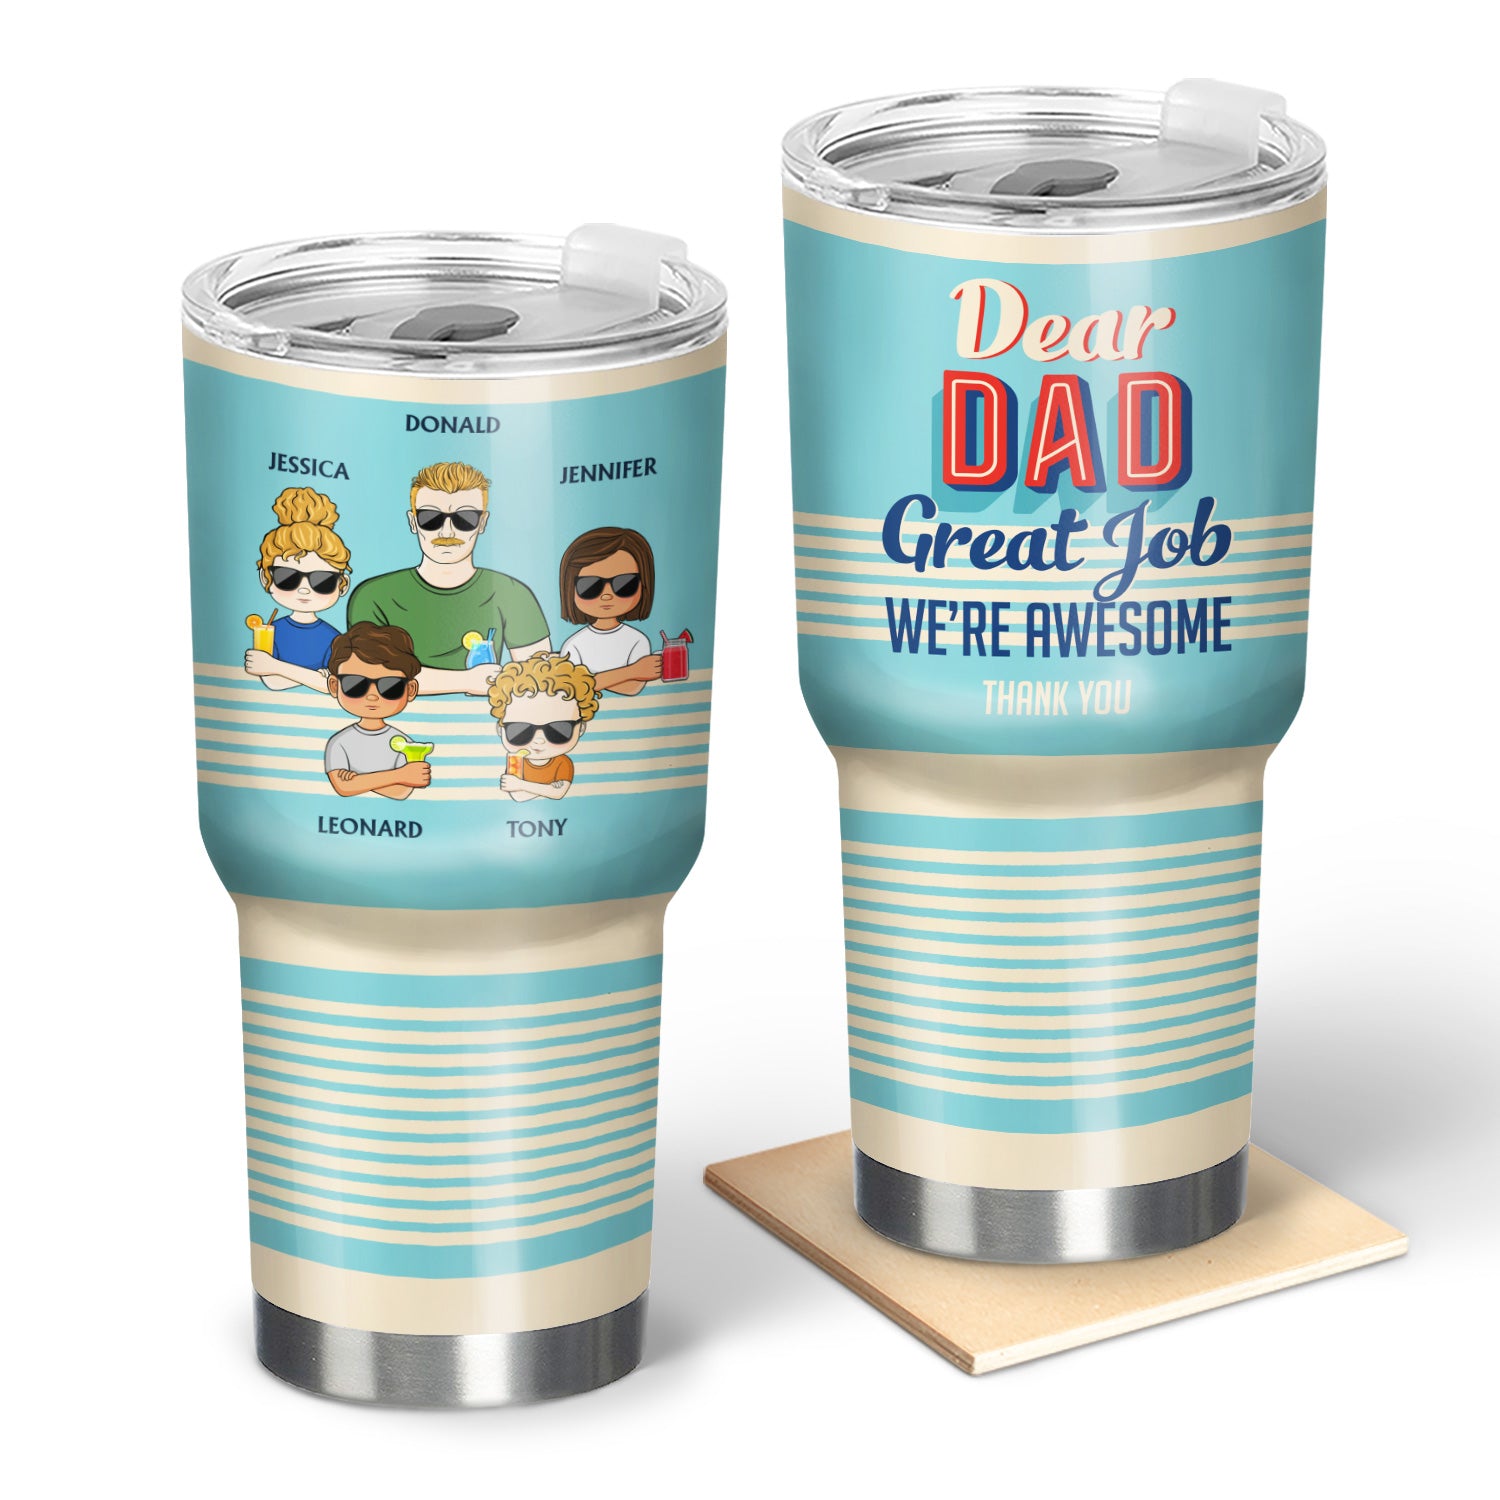 Dear Dad Great Job We're Awesome Thank You Young - Birthday, Loving Gift For Father, Grandpa, Grandfather - Personalized Custom 30 Oz Tumbler